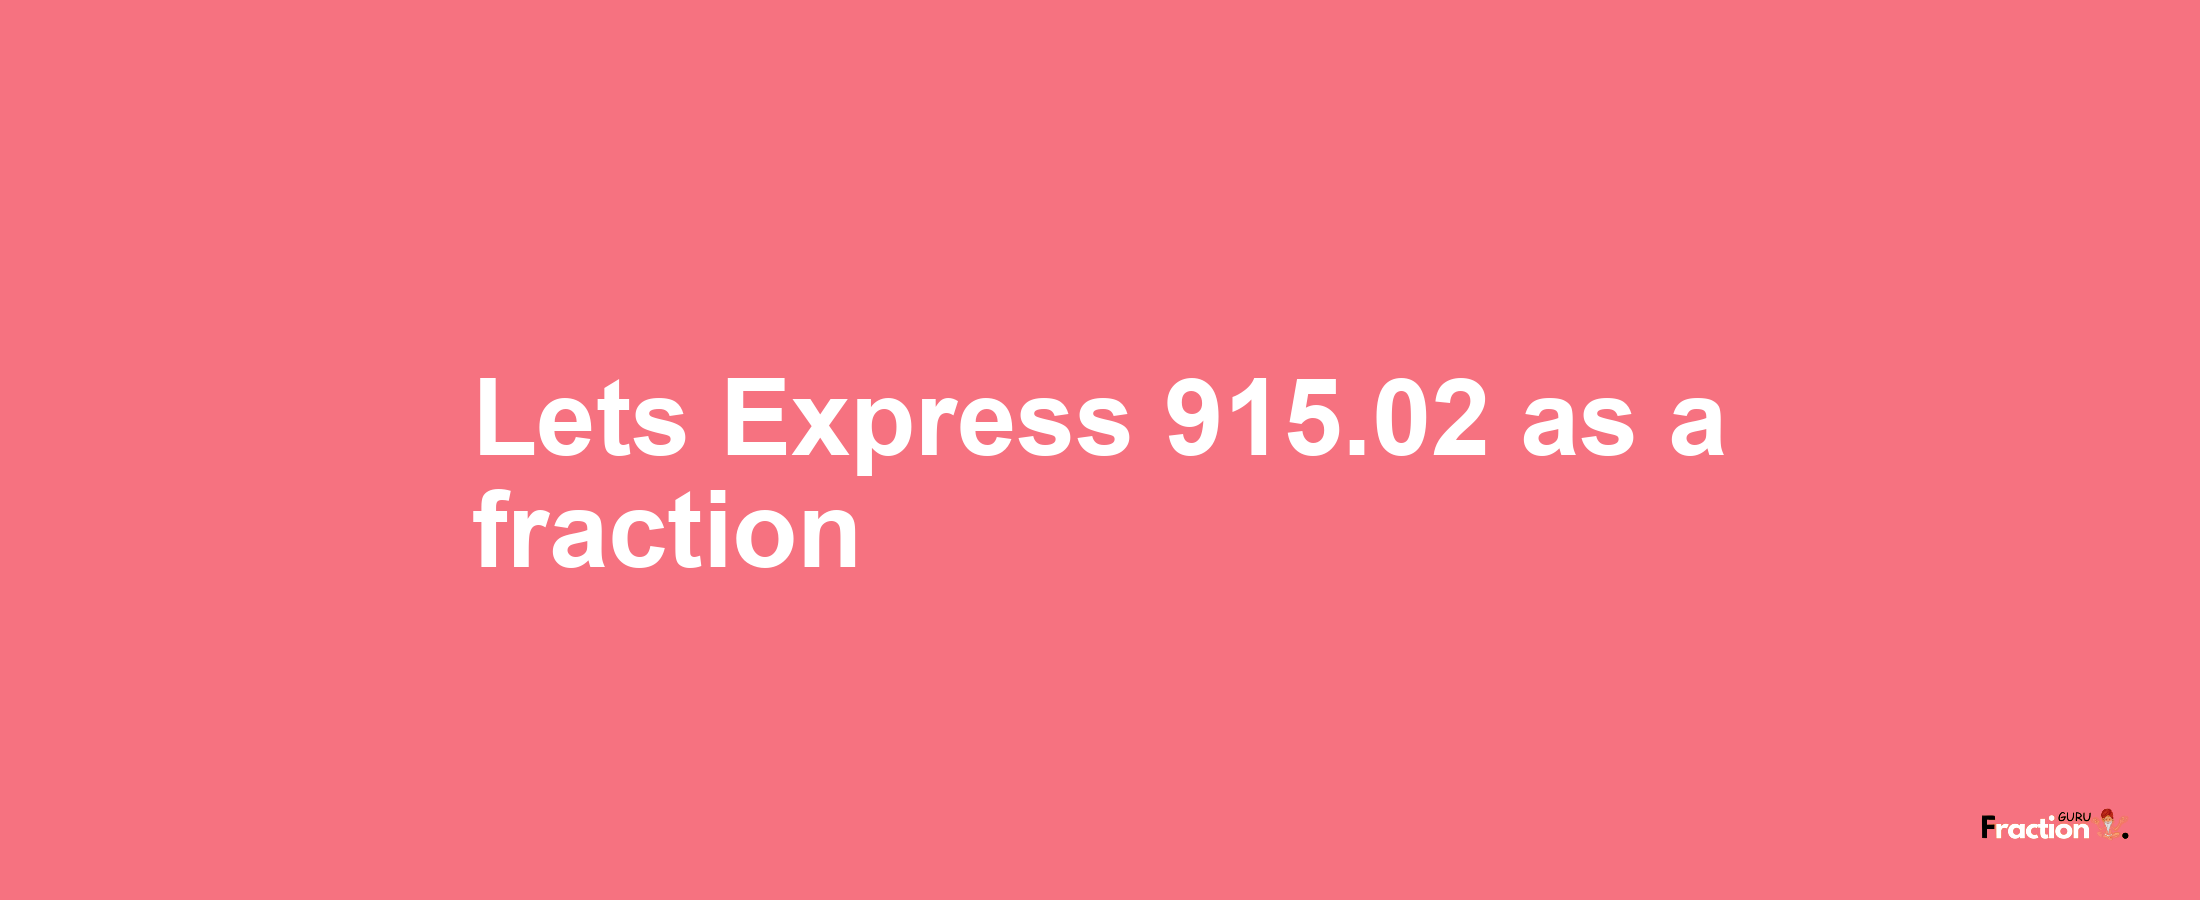 Lets Express 915.02 as afraction